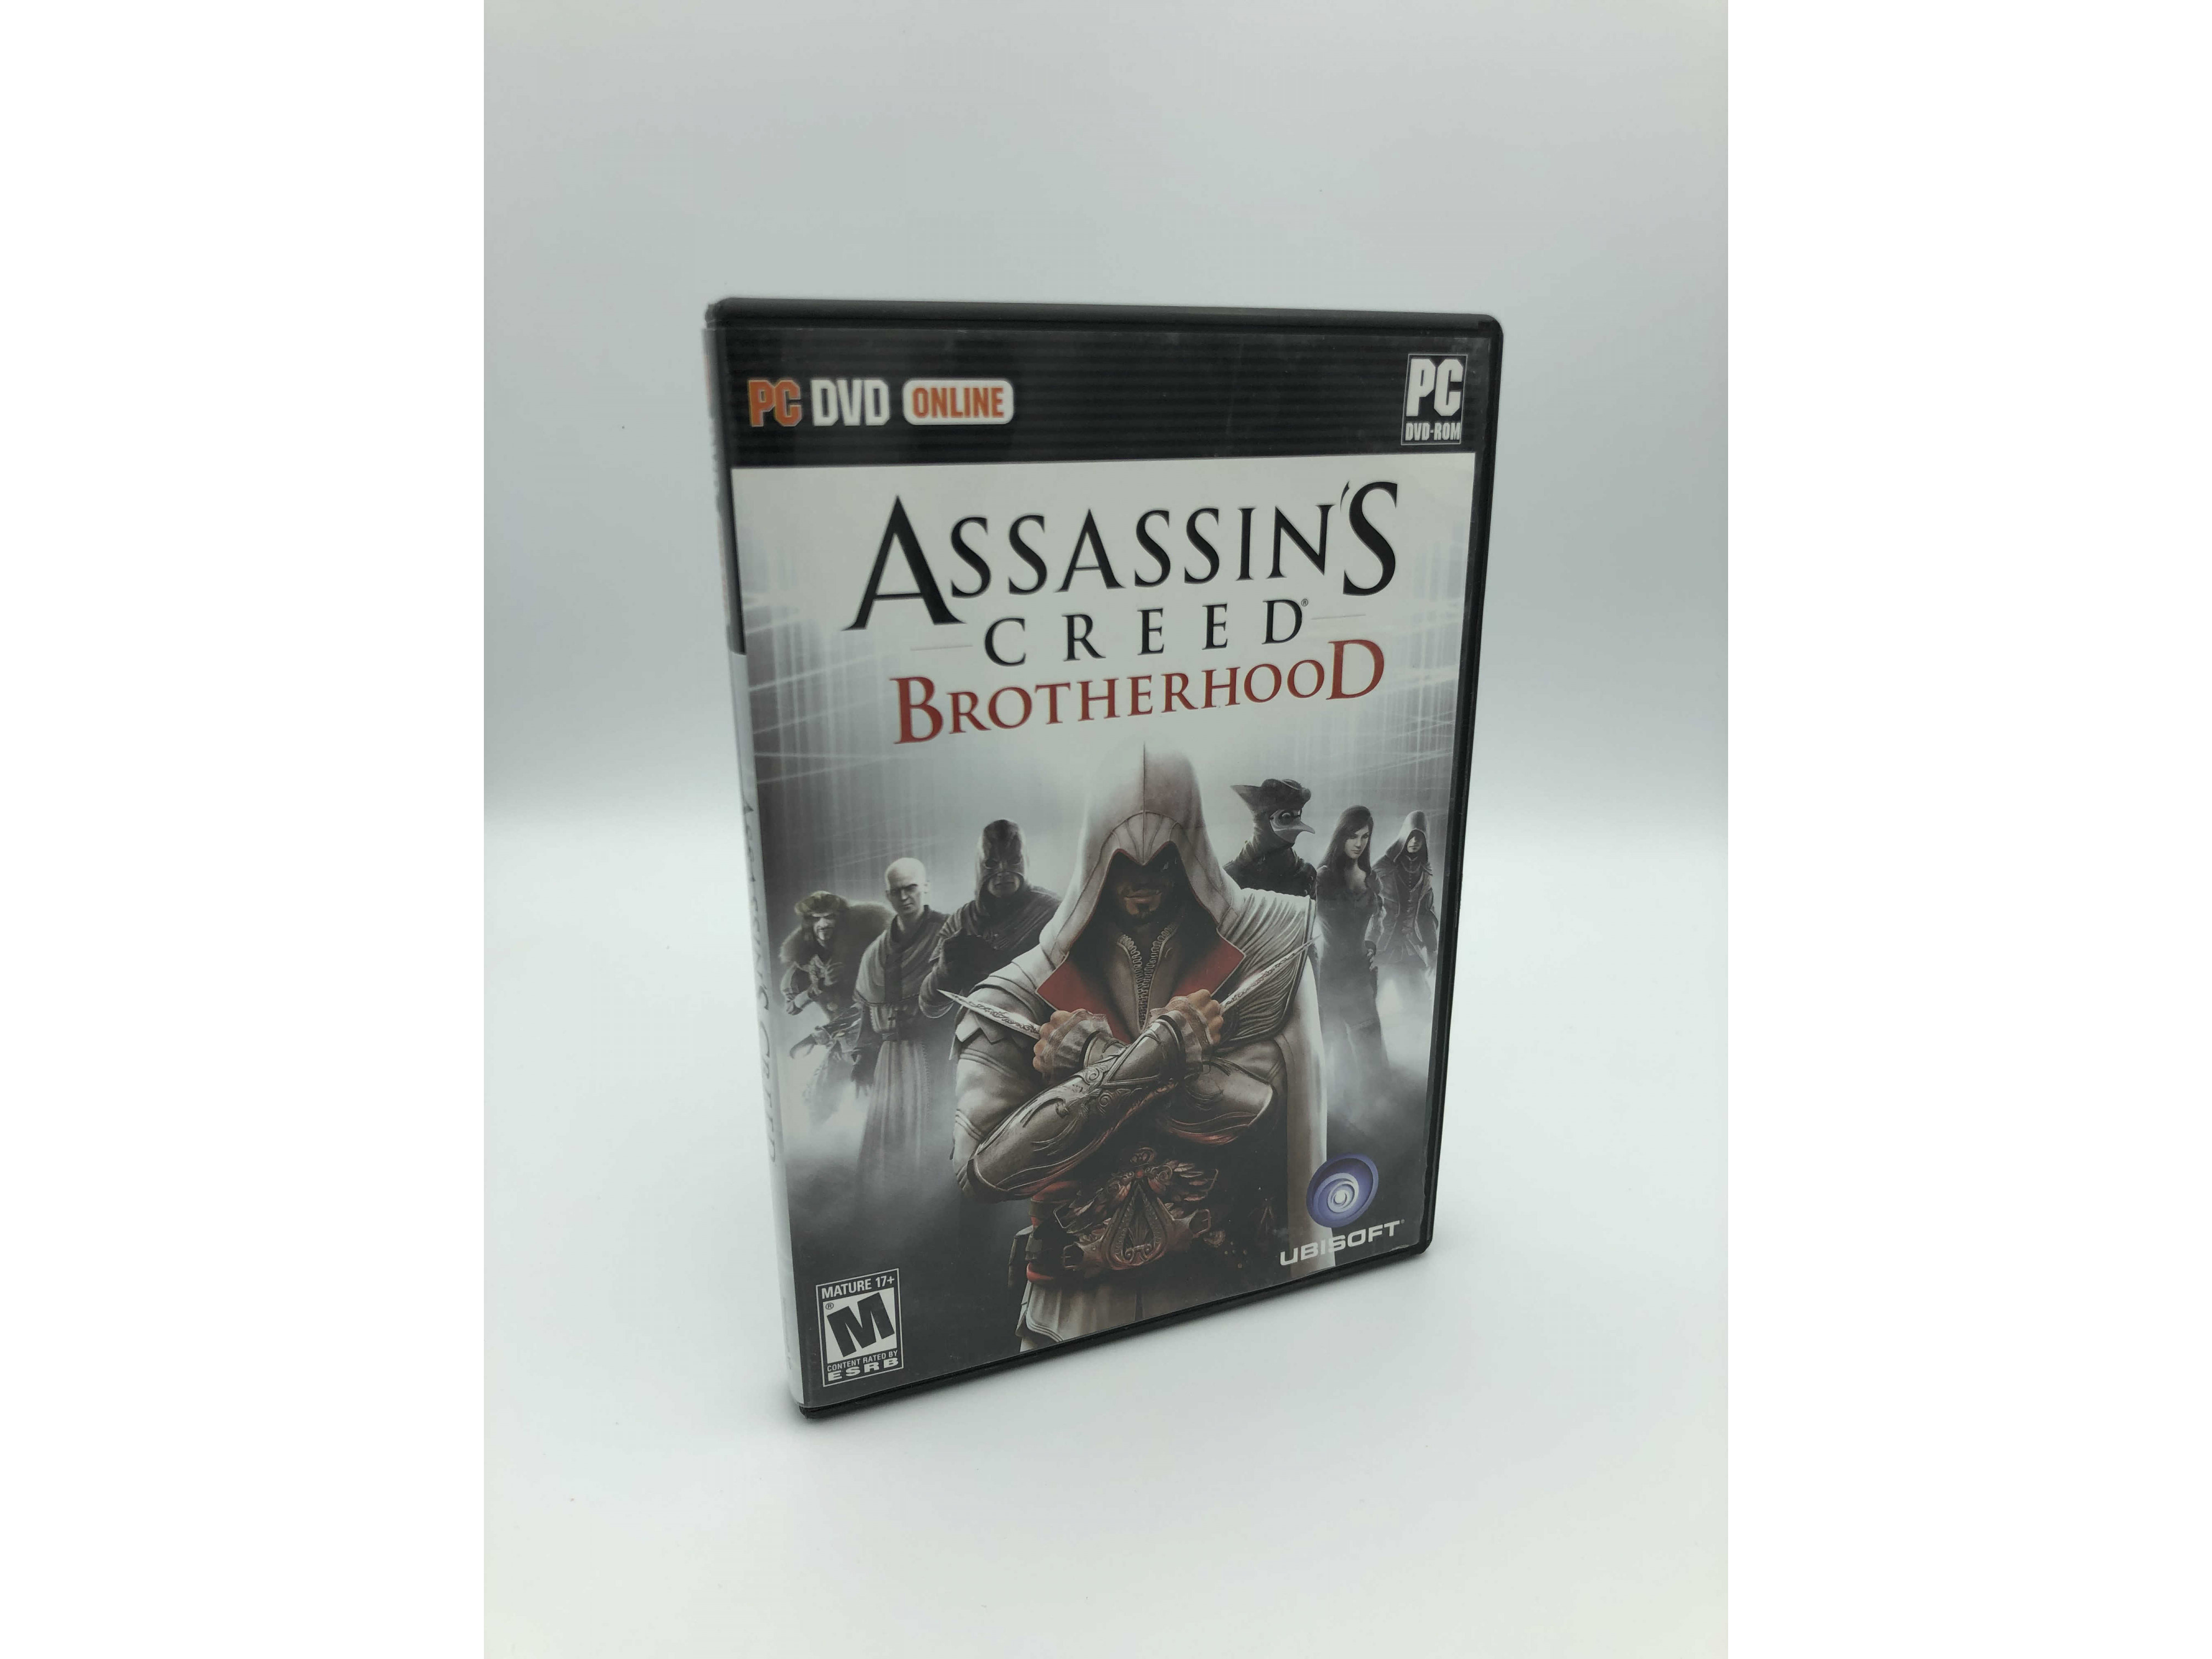 Assassin's Creed II (PC DVD-ROM, 2009, M) VIDEO GAME - CASE & DISC